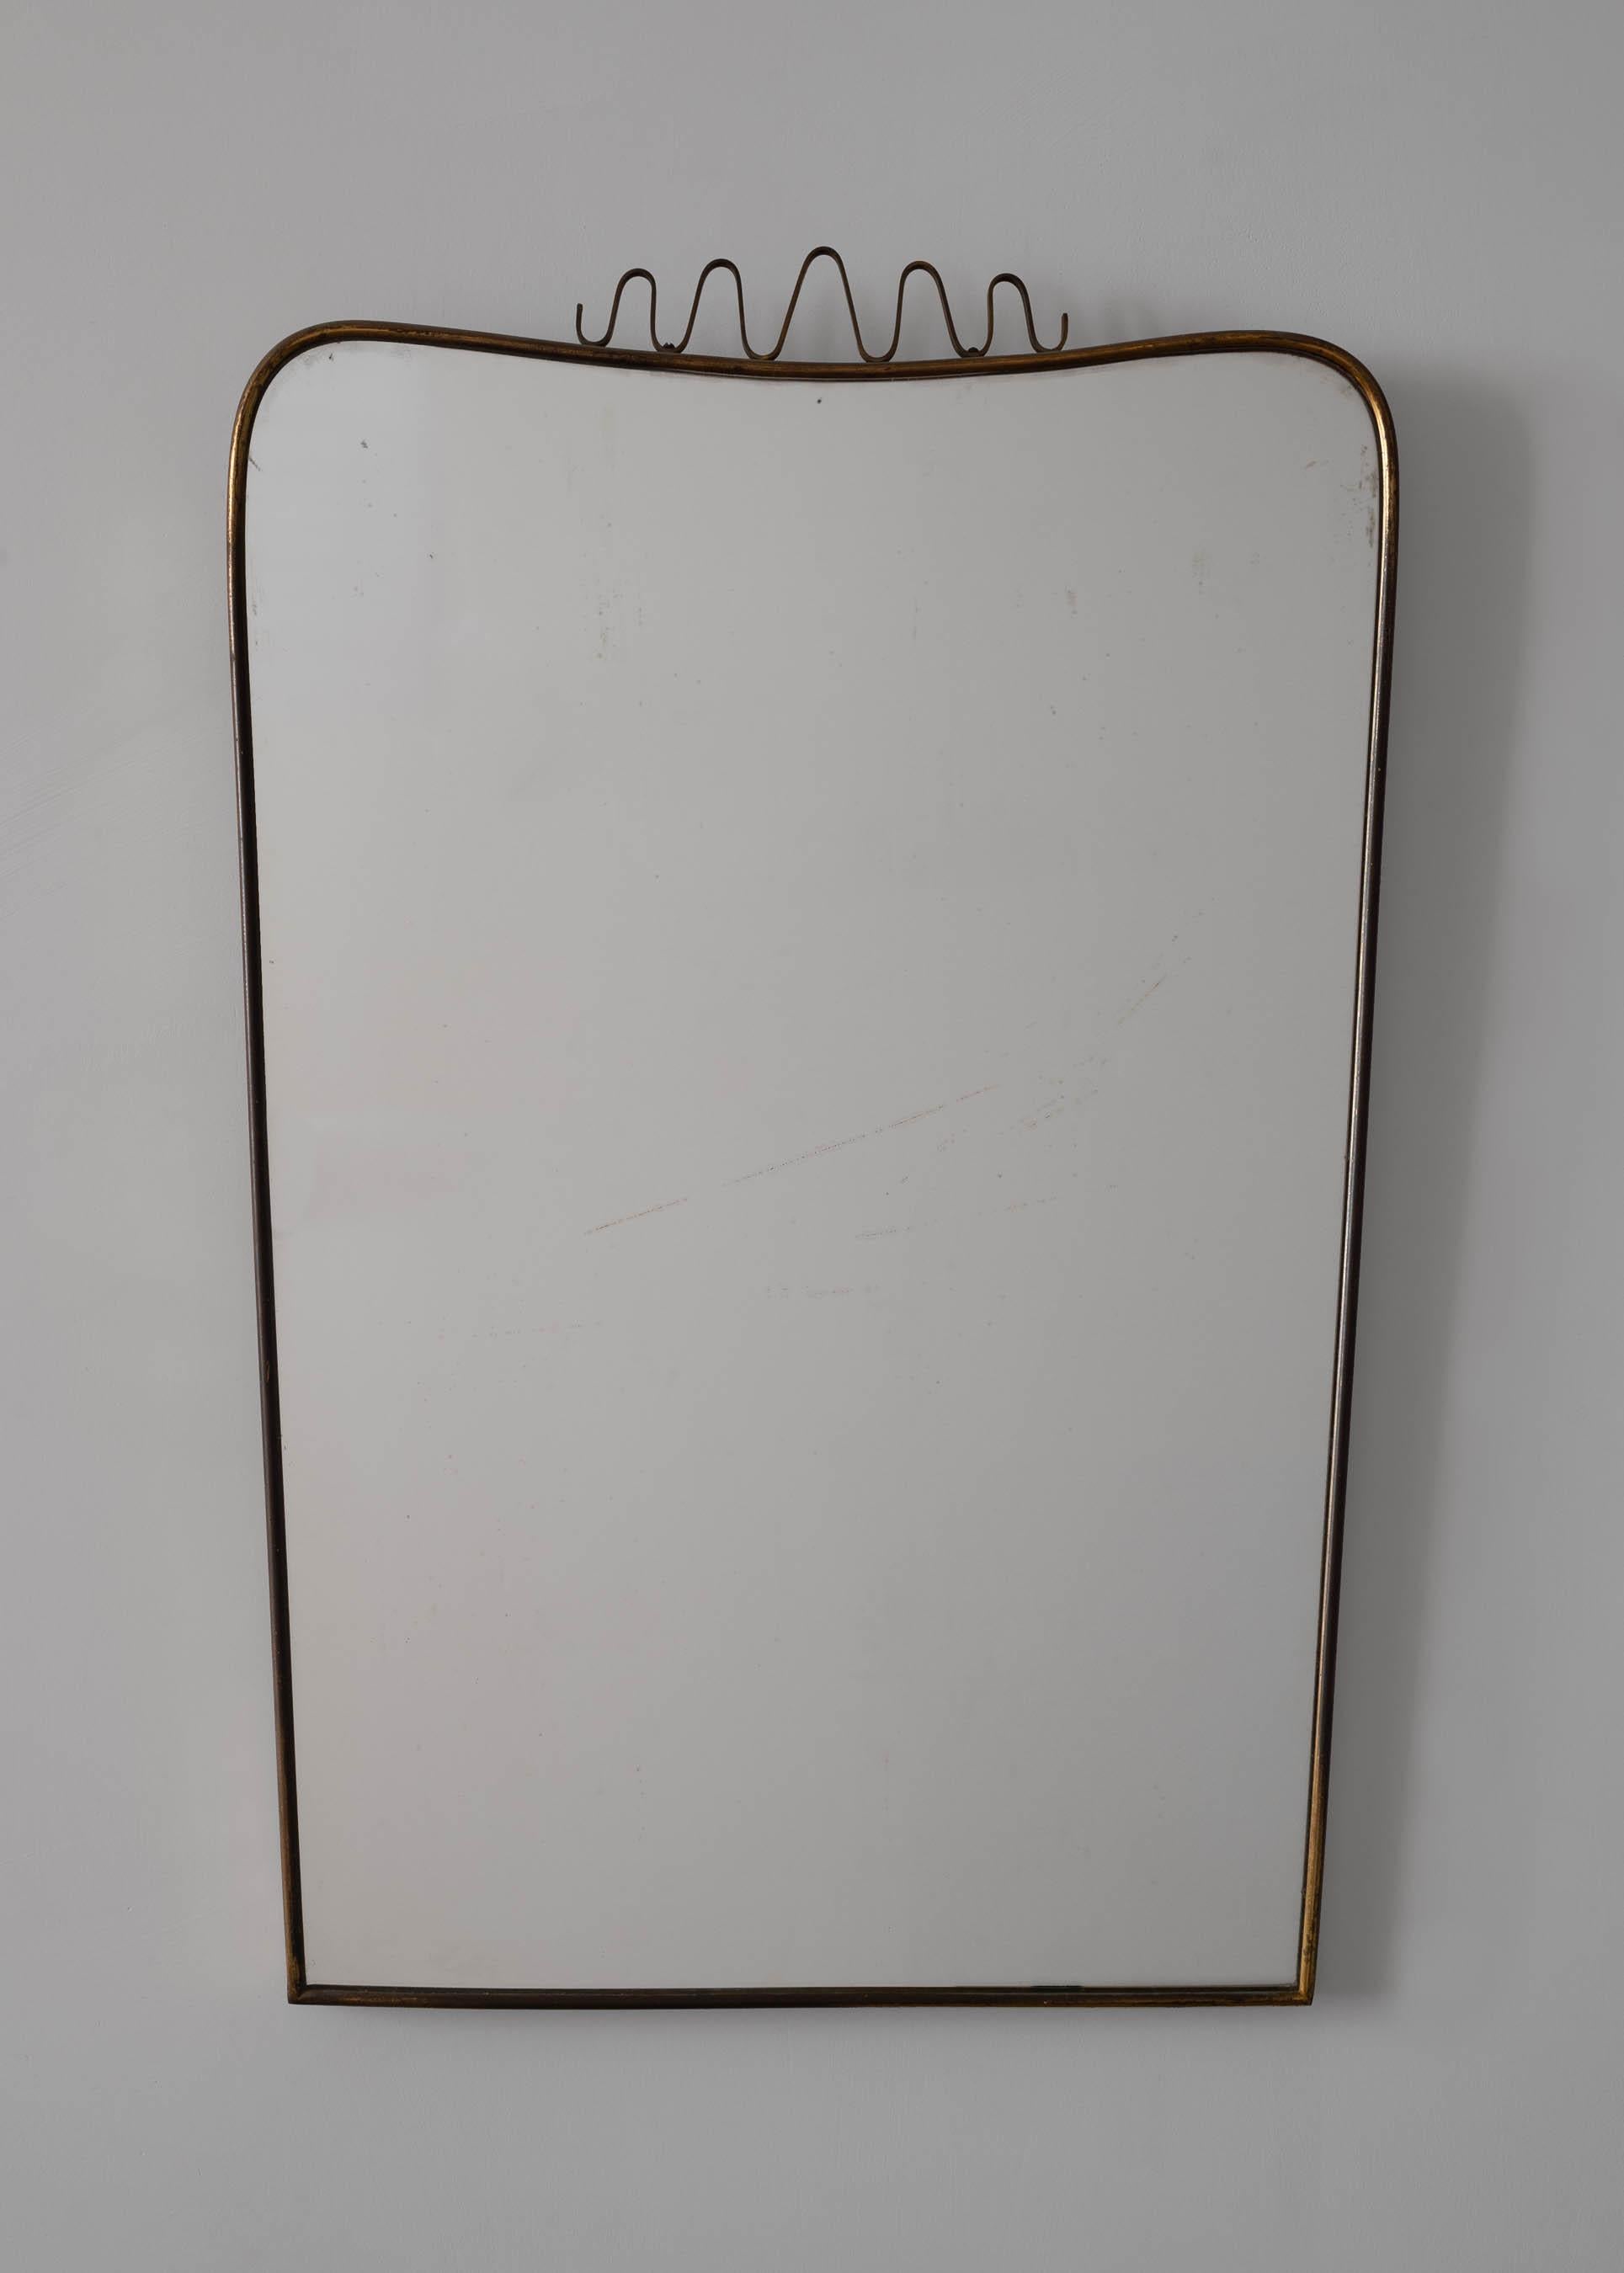 Italian patinated brass framed wall mirrors with detail. Made in Italy, circa 1960s.

Two mirrors available with matching dimensions and slight variation of patina to brass.